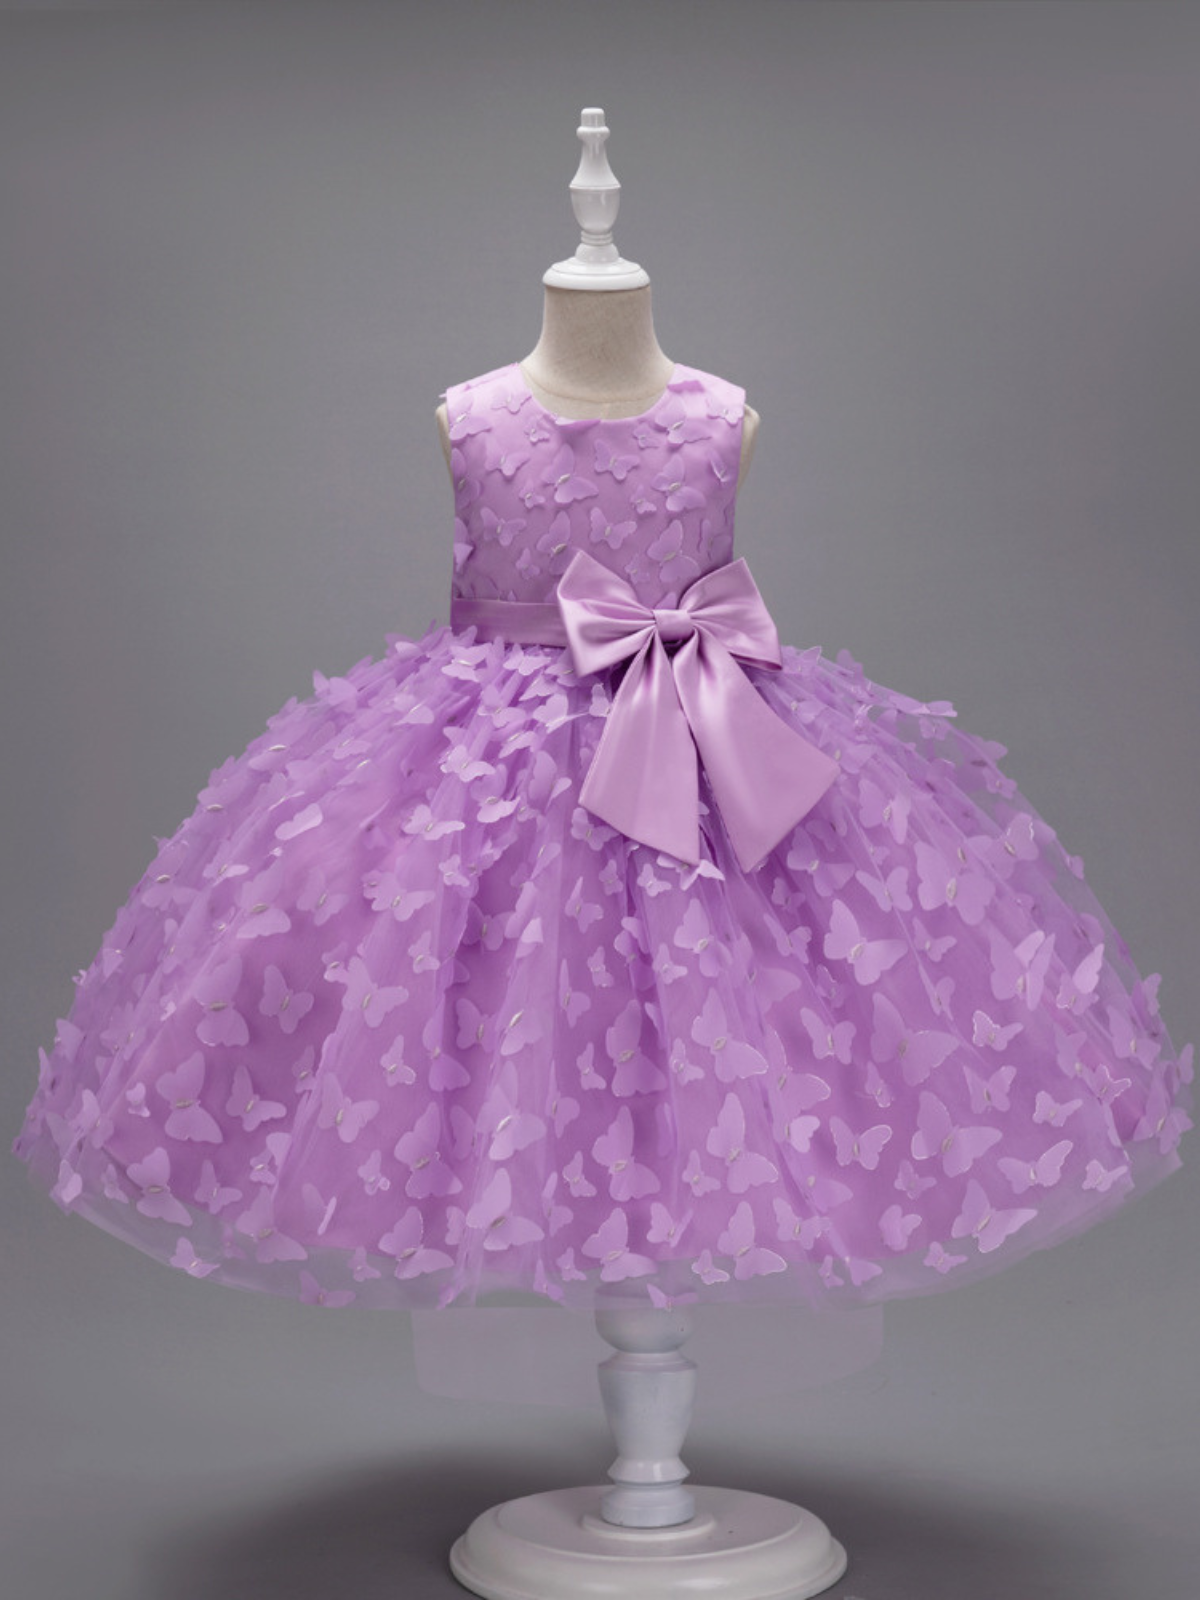 Girls Formal Easter Dresses | Butterfly Embroidered Tulle Tutu Dress